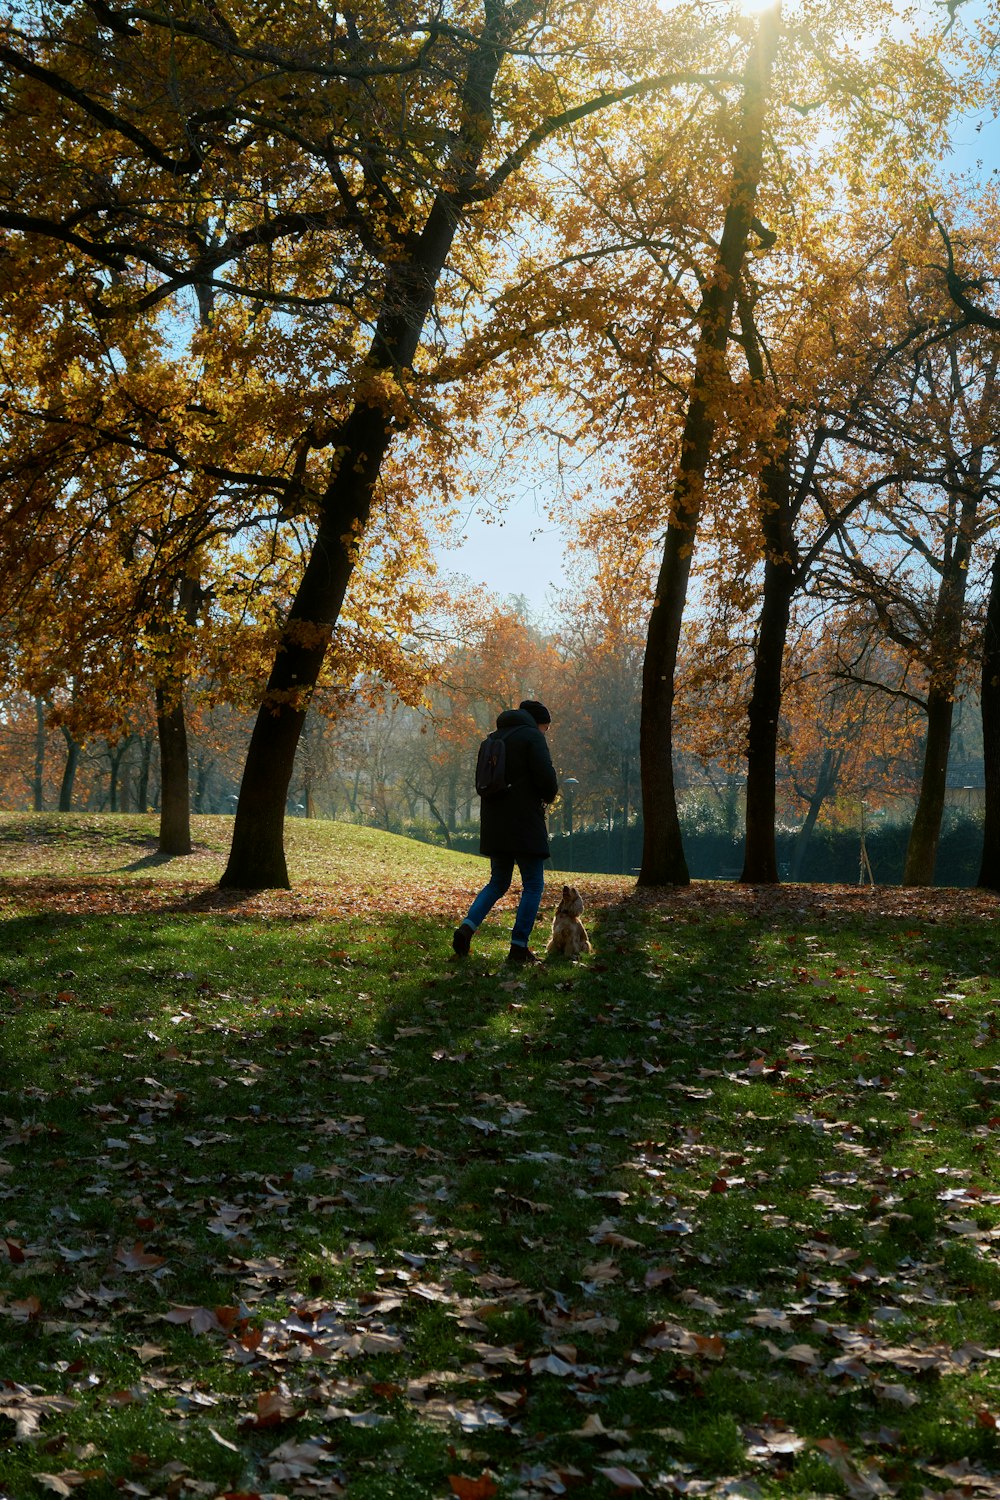 a person walking through a park with trees in the background